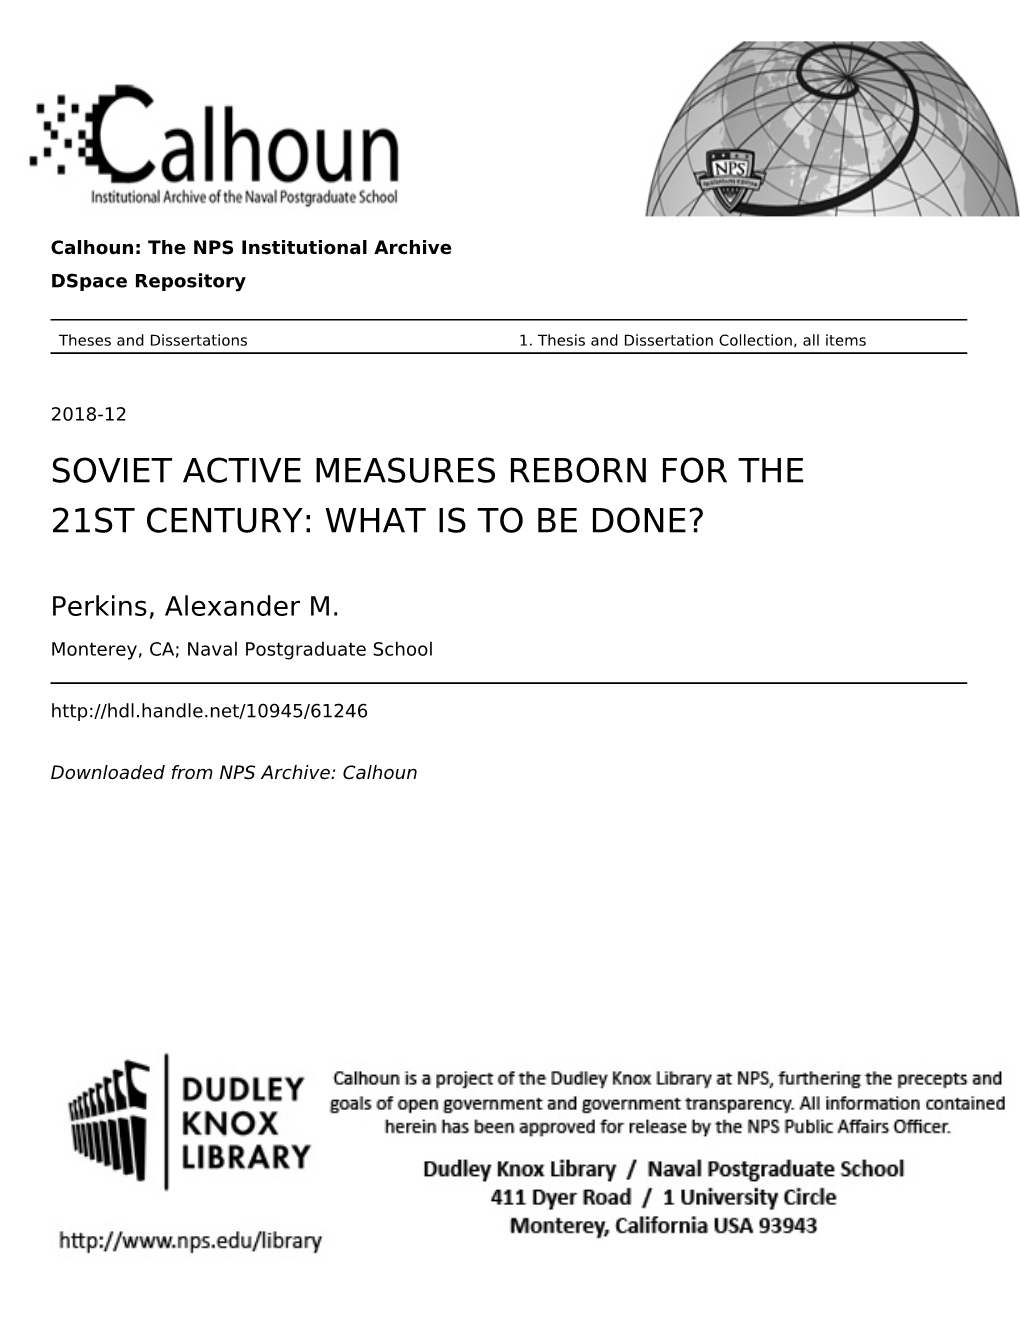 Soviet Active Measures Reborn for the 21St Century: What Is to Be Done?